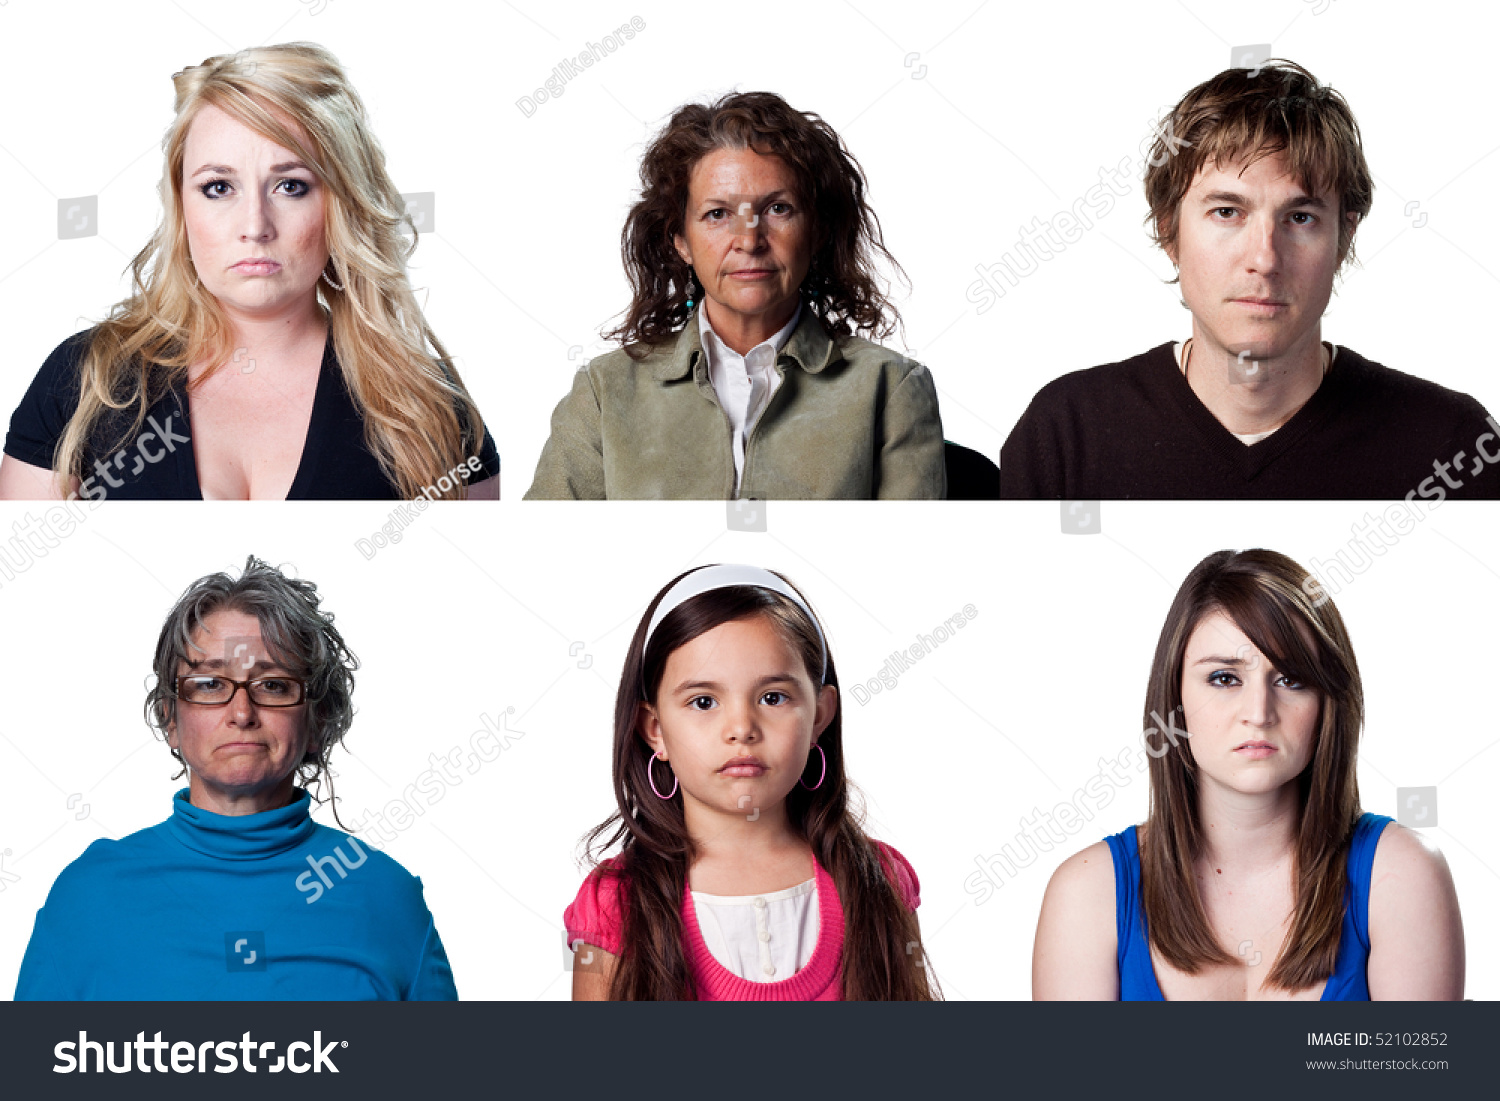 Group Of People With Blank Stares On Their Faces Stock Photo 52102852 ...